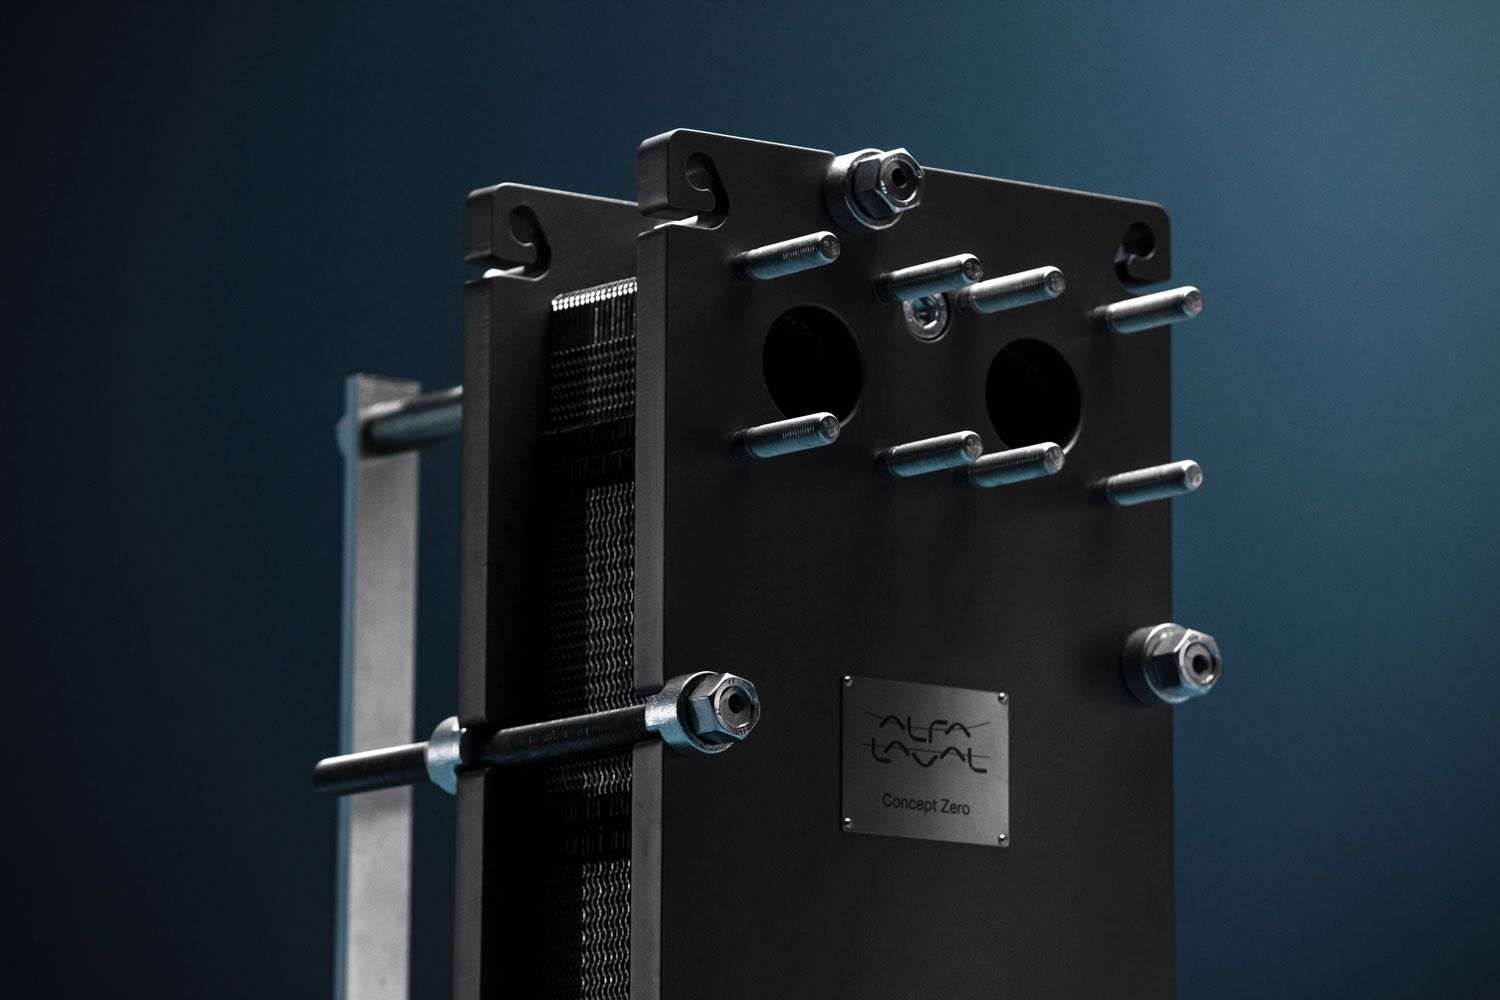 EcoDataCenter first data center to use Alfa Laval heat exchangers with SSAB Zero™ steel.